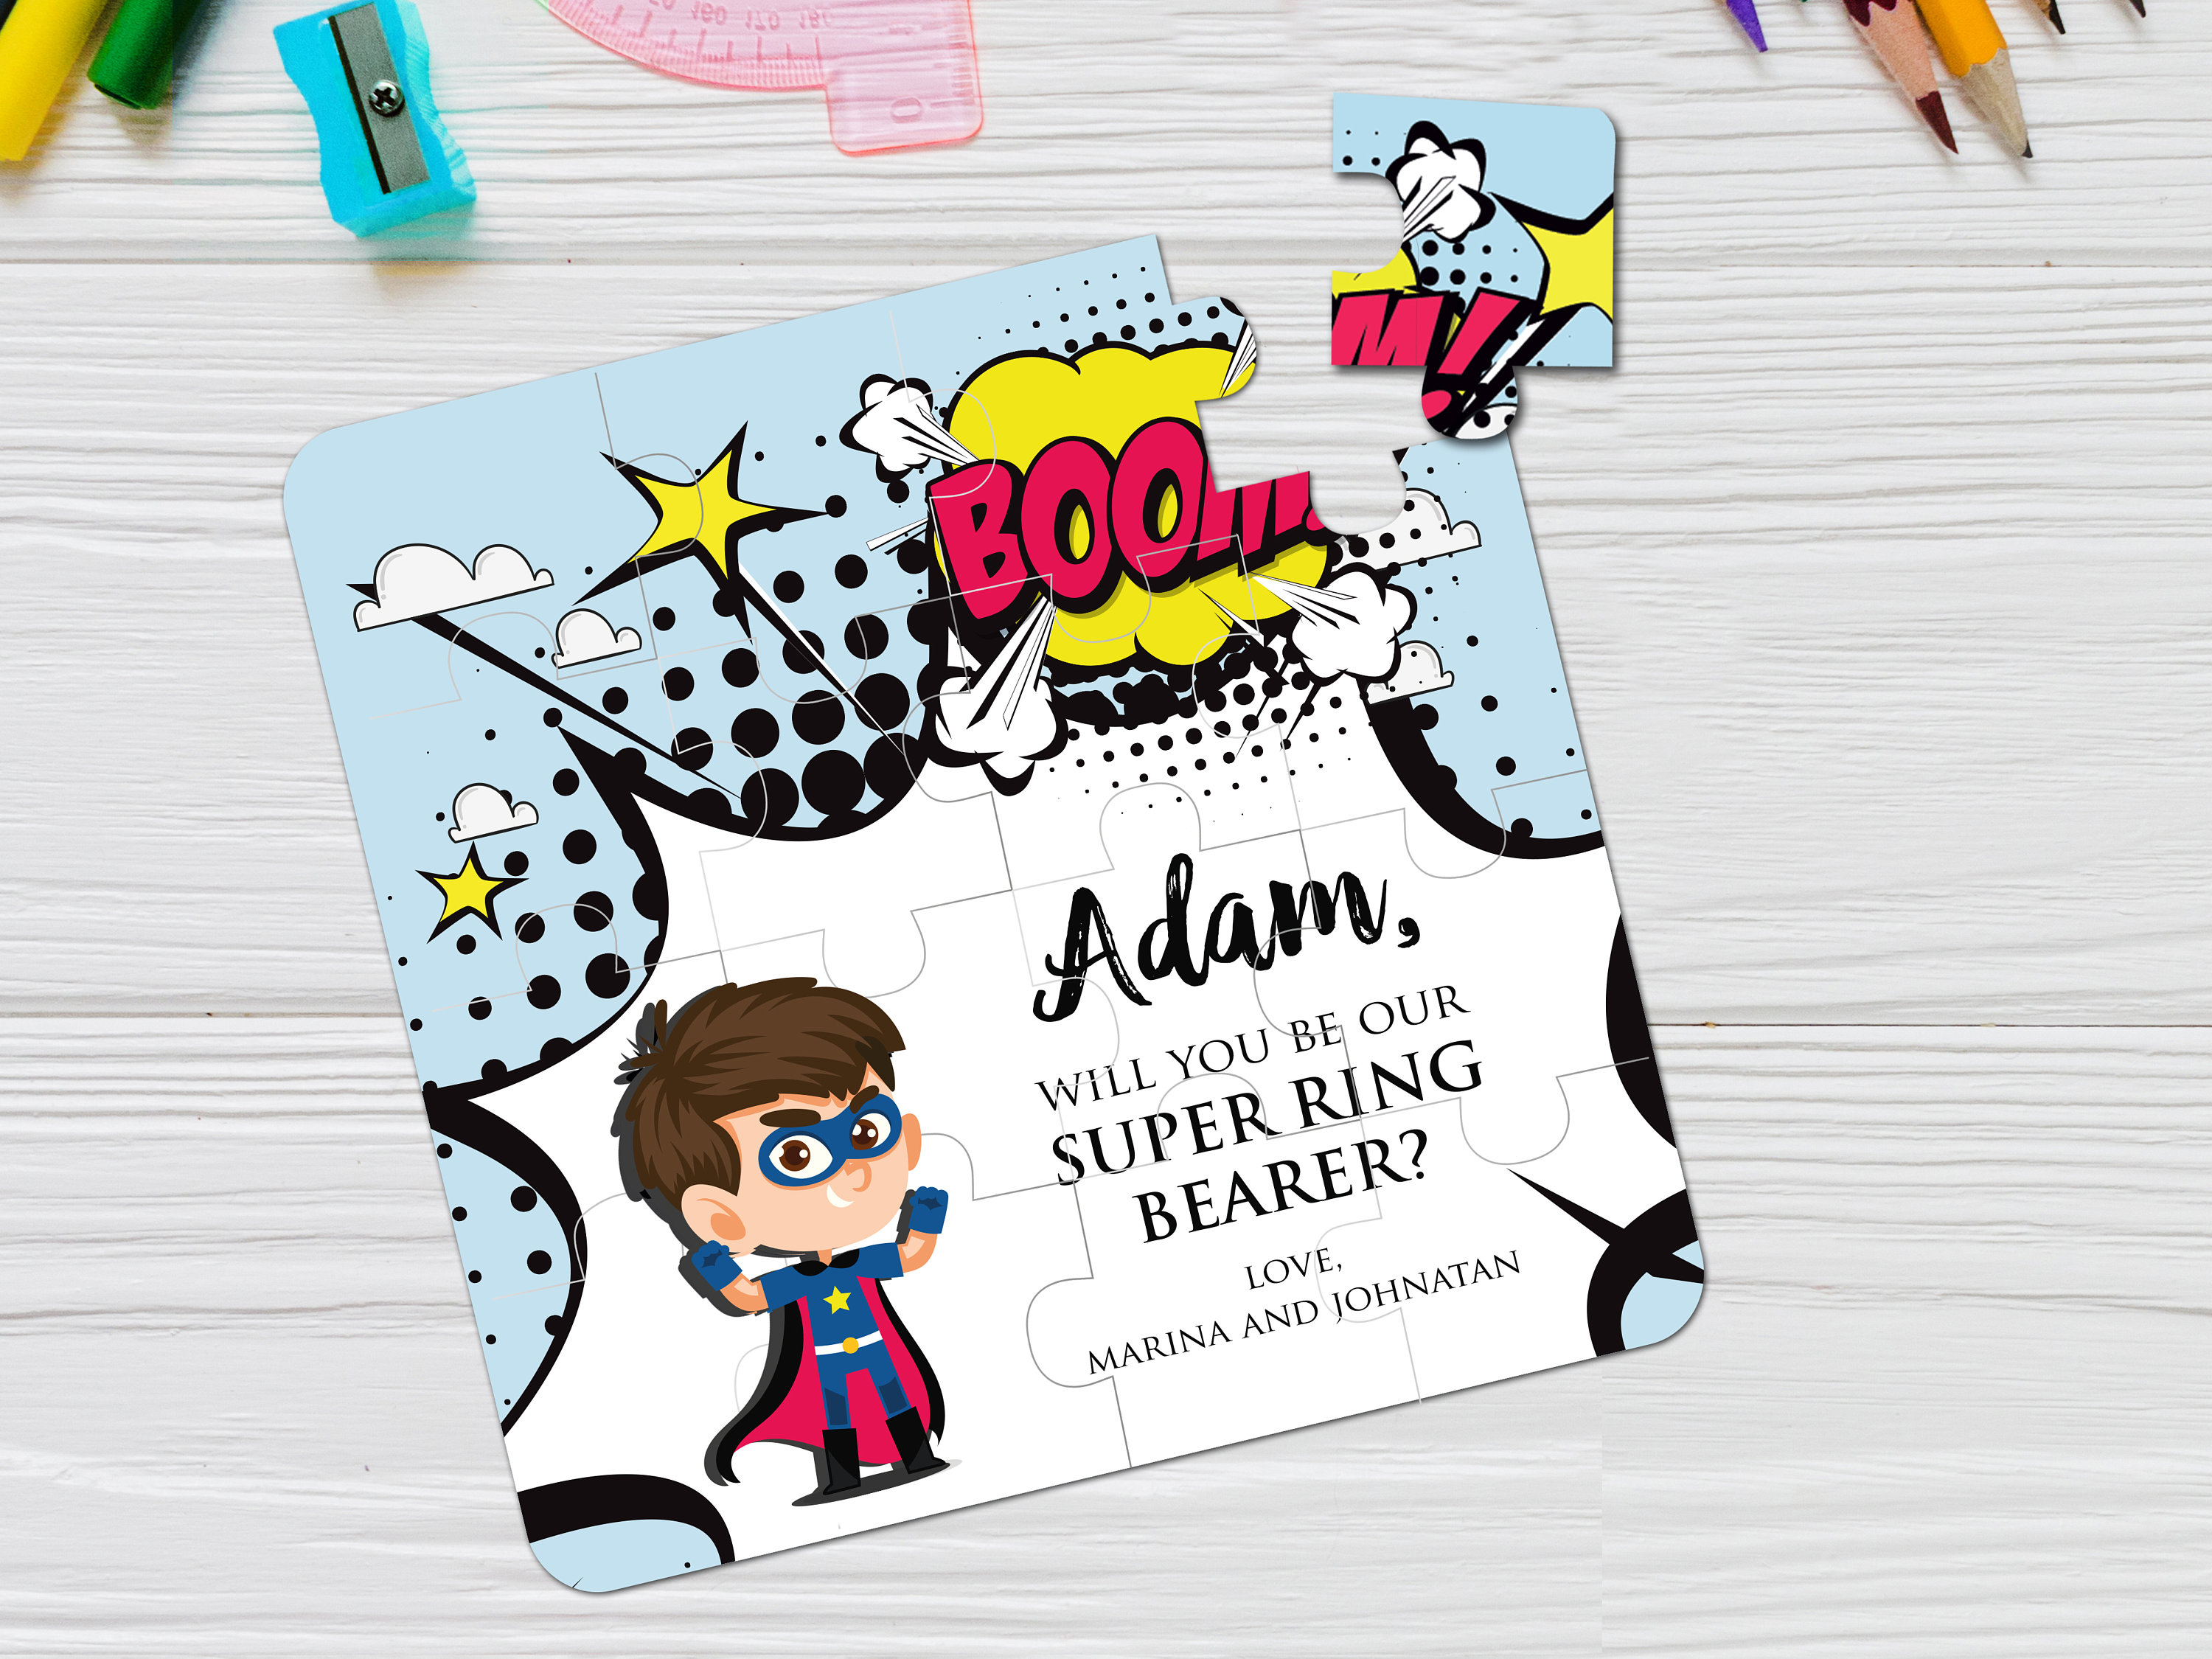 Wedding Ring Bearer Proposal Puzzle Gift Puzzle For Kids